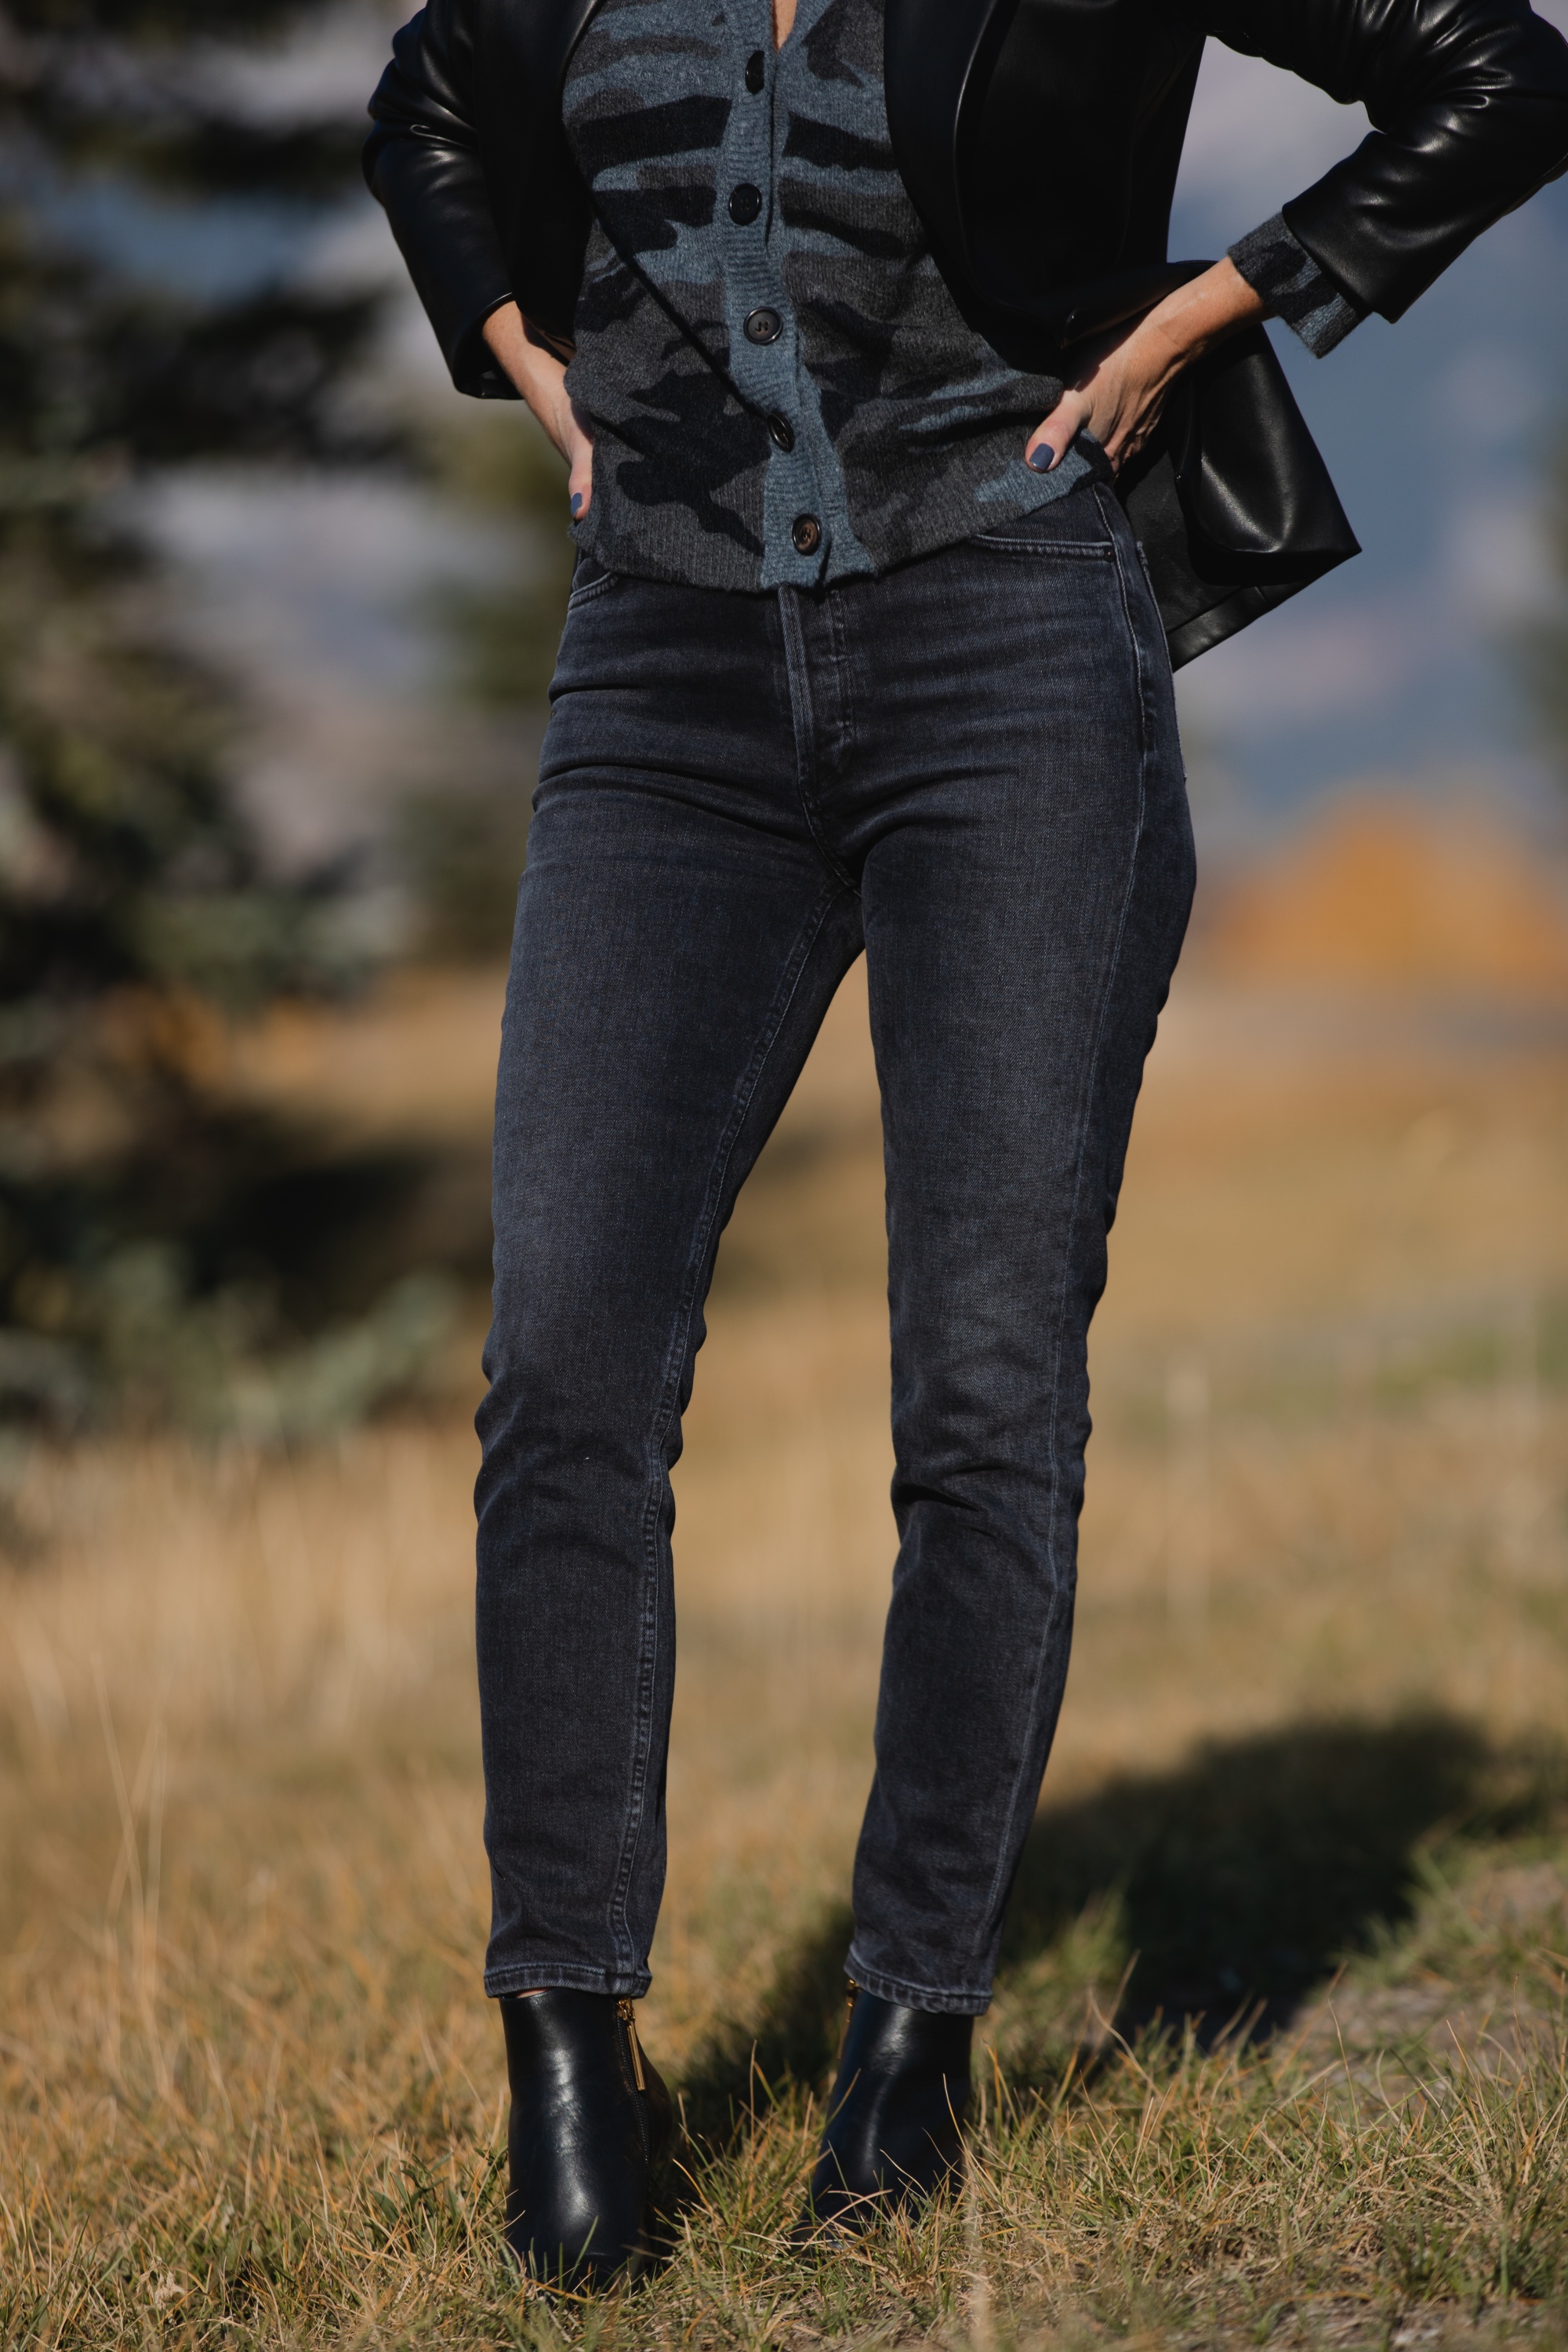 Favorite Fall Jackets, Erin Busbee of Busbee Style holding a black faux leather blazer by Theory and wearing dark gray wash Agolde Nico jeans, black Louise et Cie booties, and Rails camo cardigan sweater in Telluride, Colorado